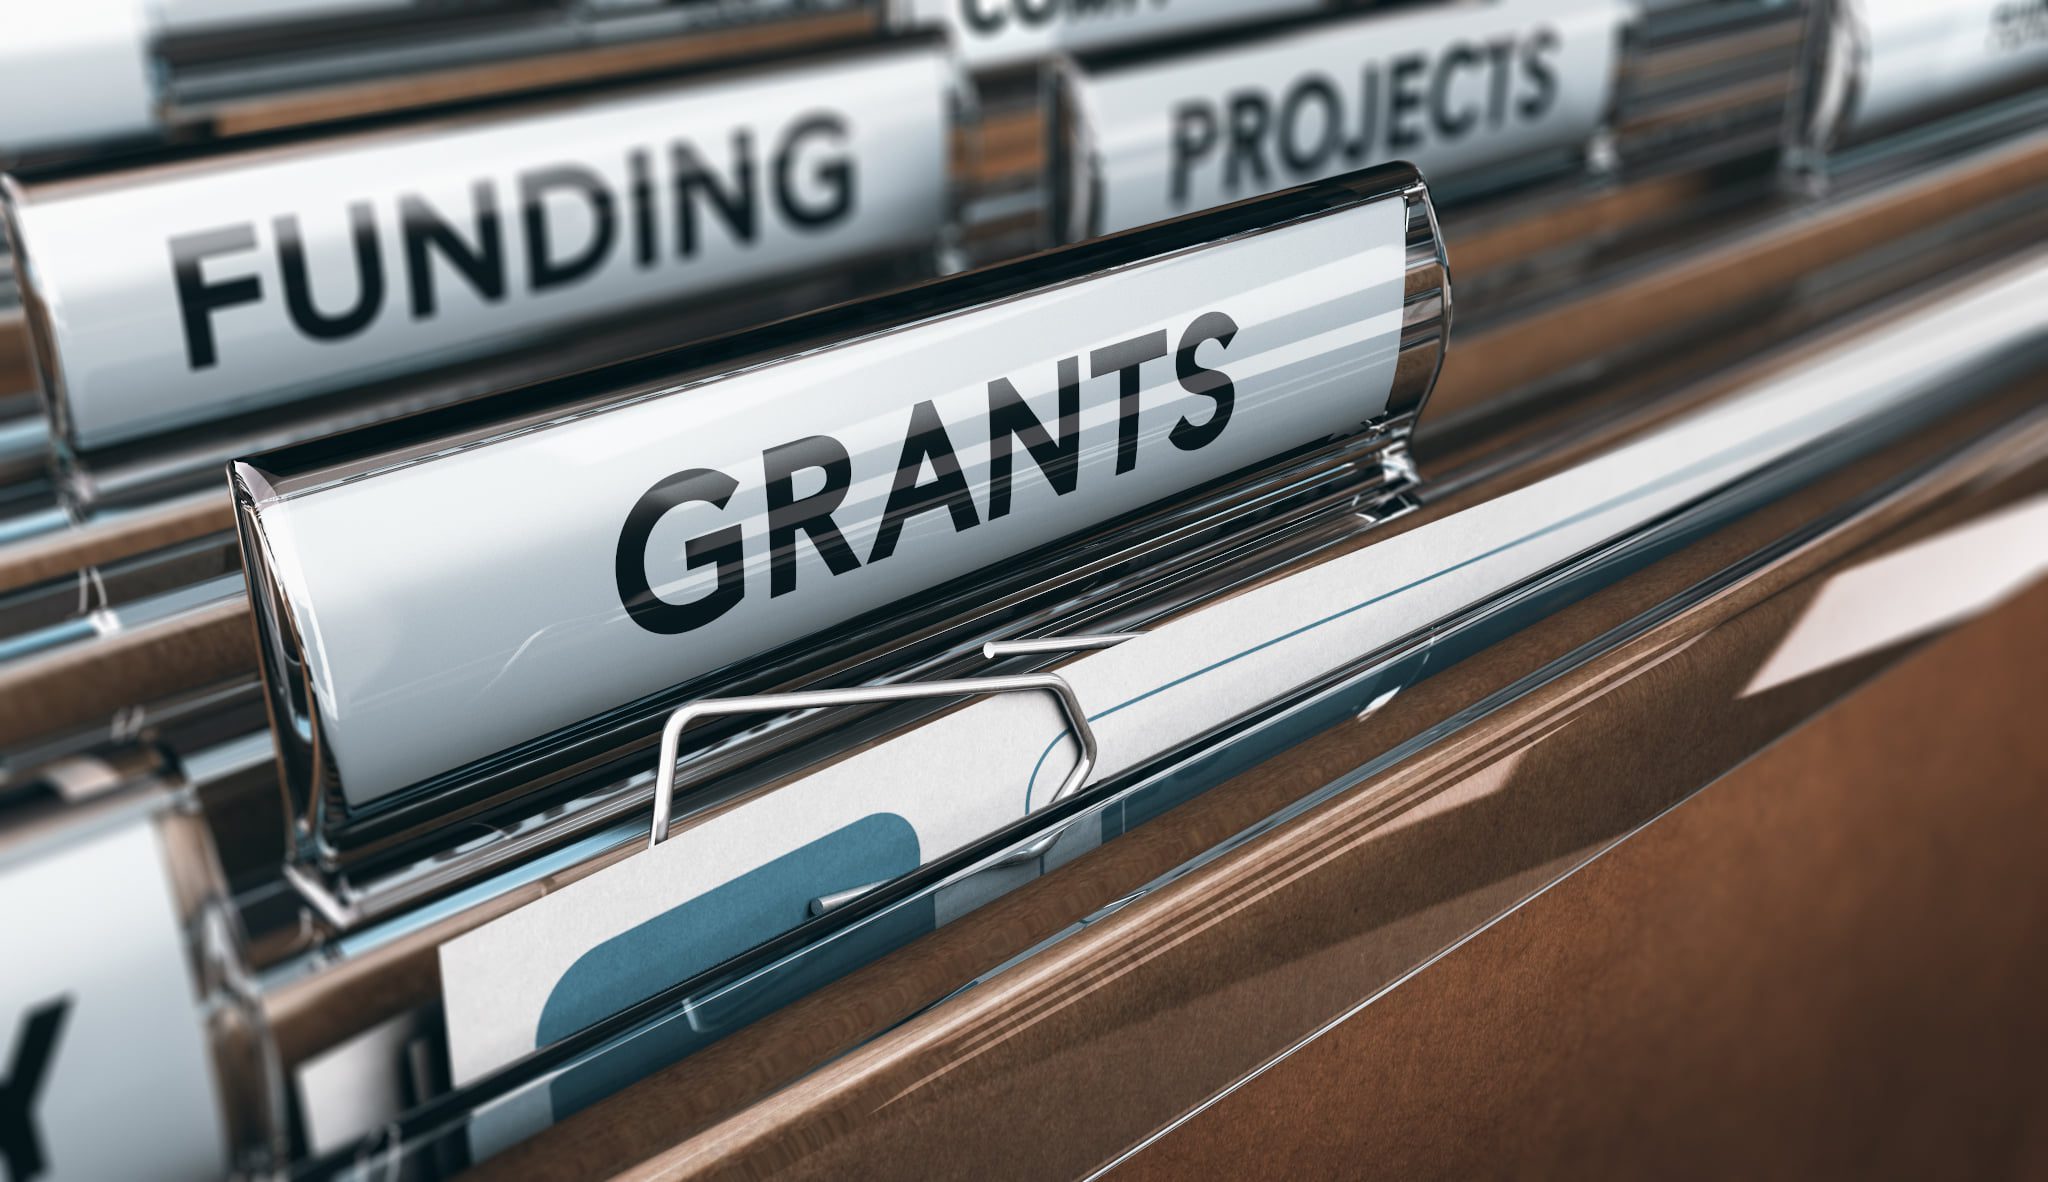 Federal Funding and Government Grants